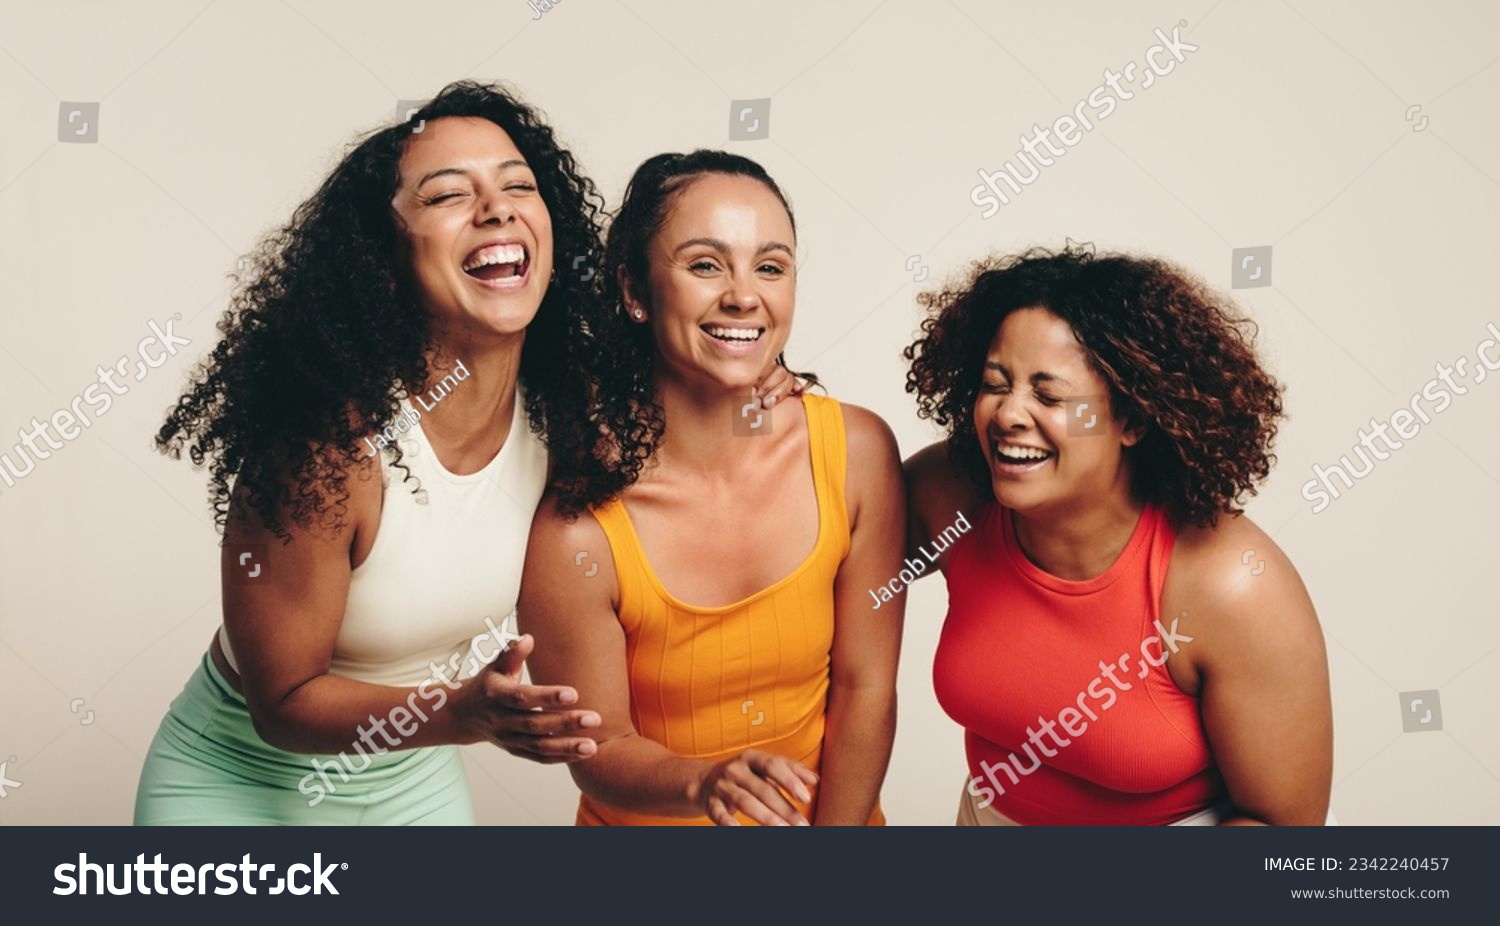 Cheerful group of three young, diverse female athletes celebrate their friendship and healthy lifestyle while wearing fitness clothing in a studio. Sporty young women laughing together. #2342240457